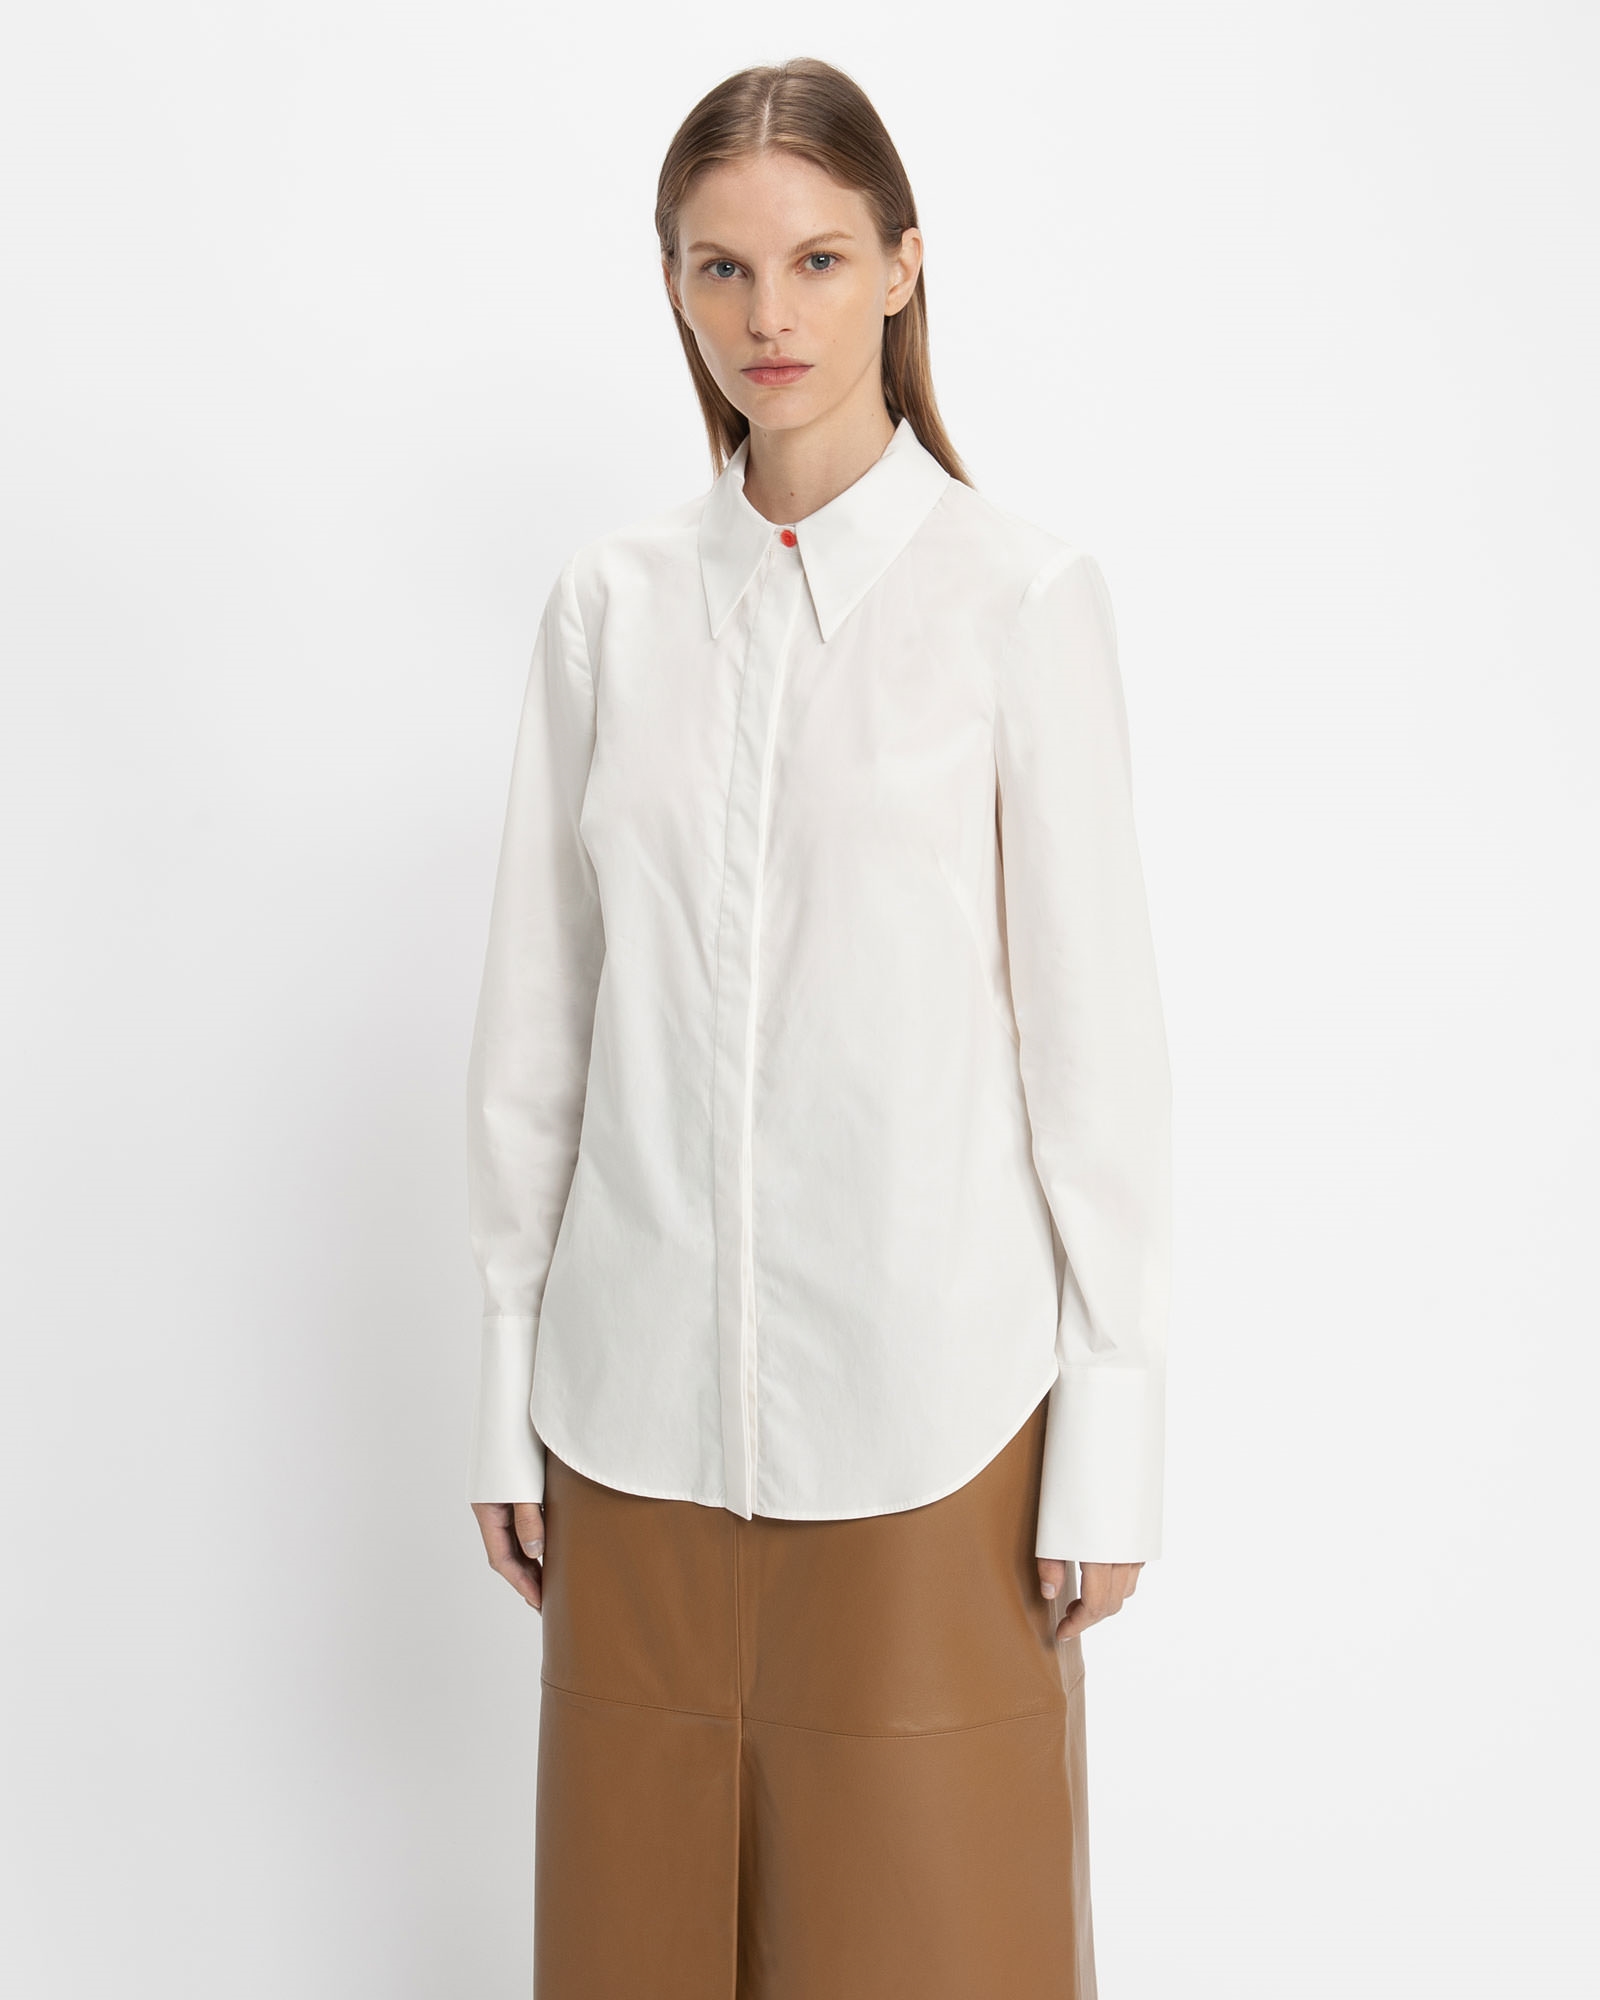 Good Earth Cotton? Shirt | Buy Tops, Shirts Online - Cue